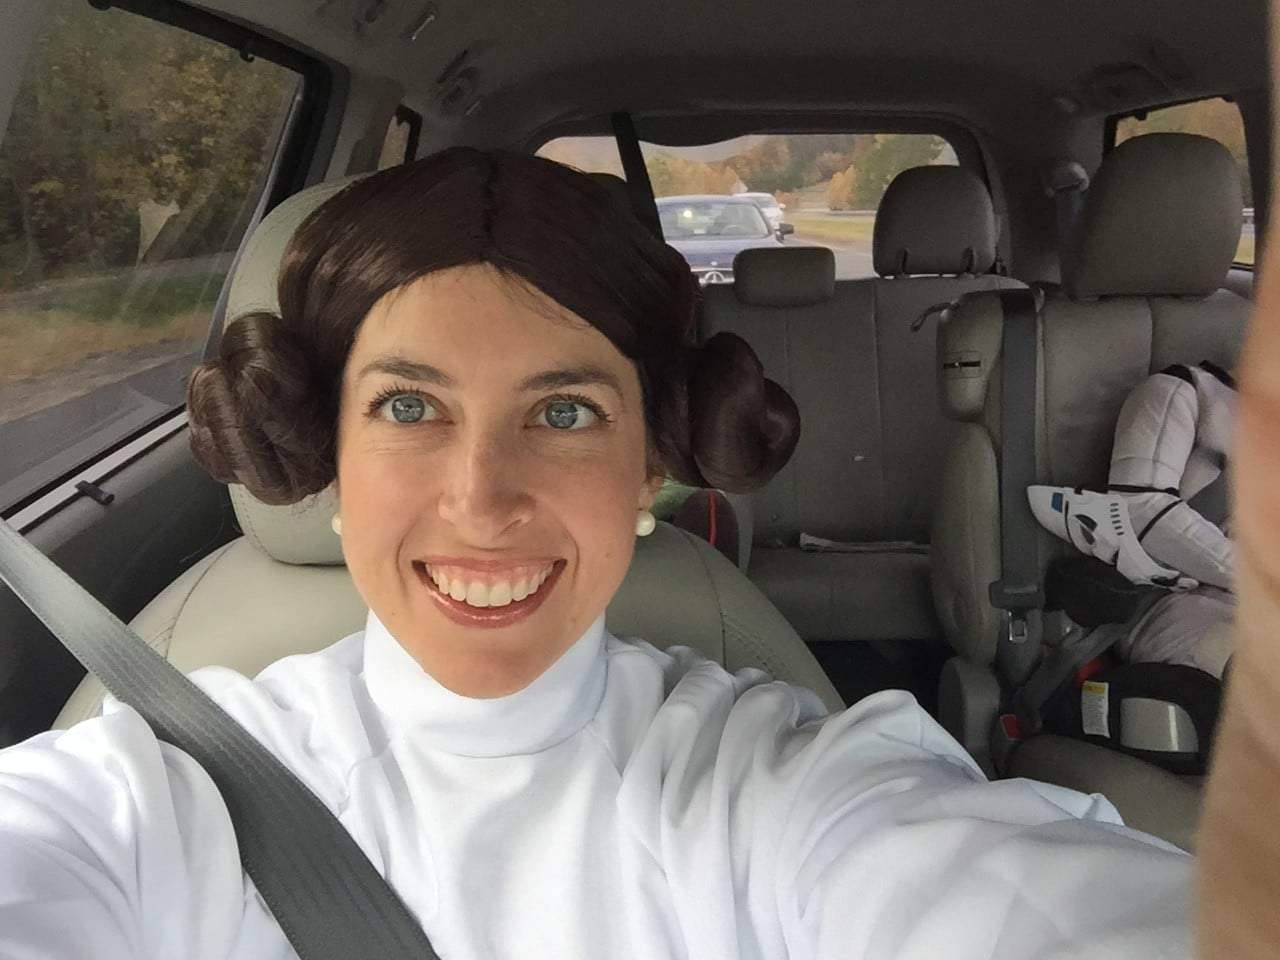 An selfie of Blair dressed up as Princess Laia from Star Wars, sitting in the front passenger seat of a car.